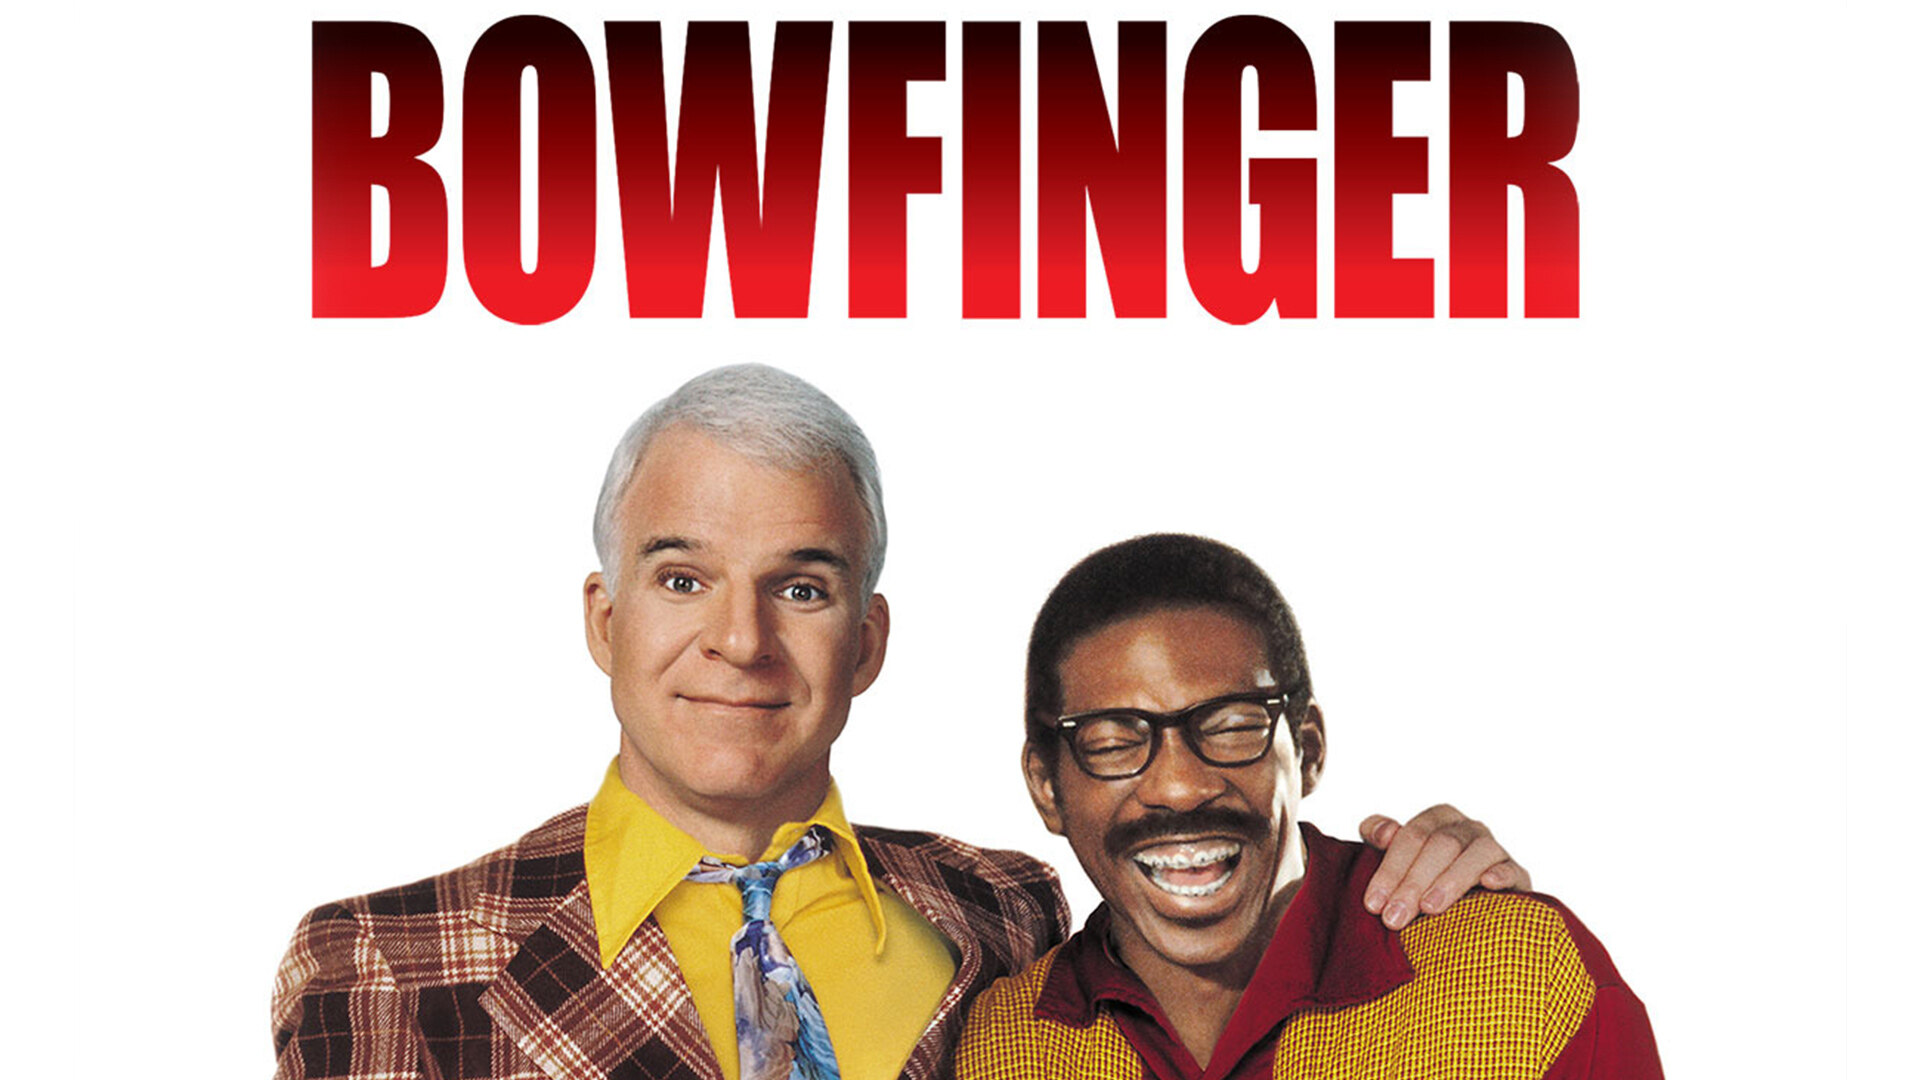 33-facts-about-the-movie-bowfinger